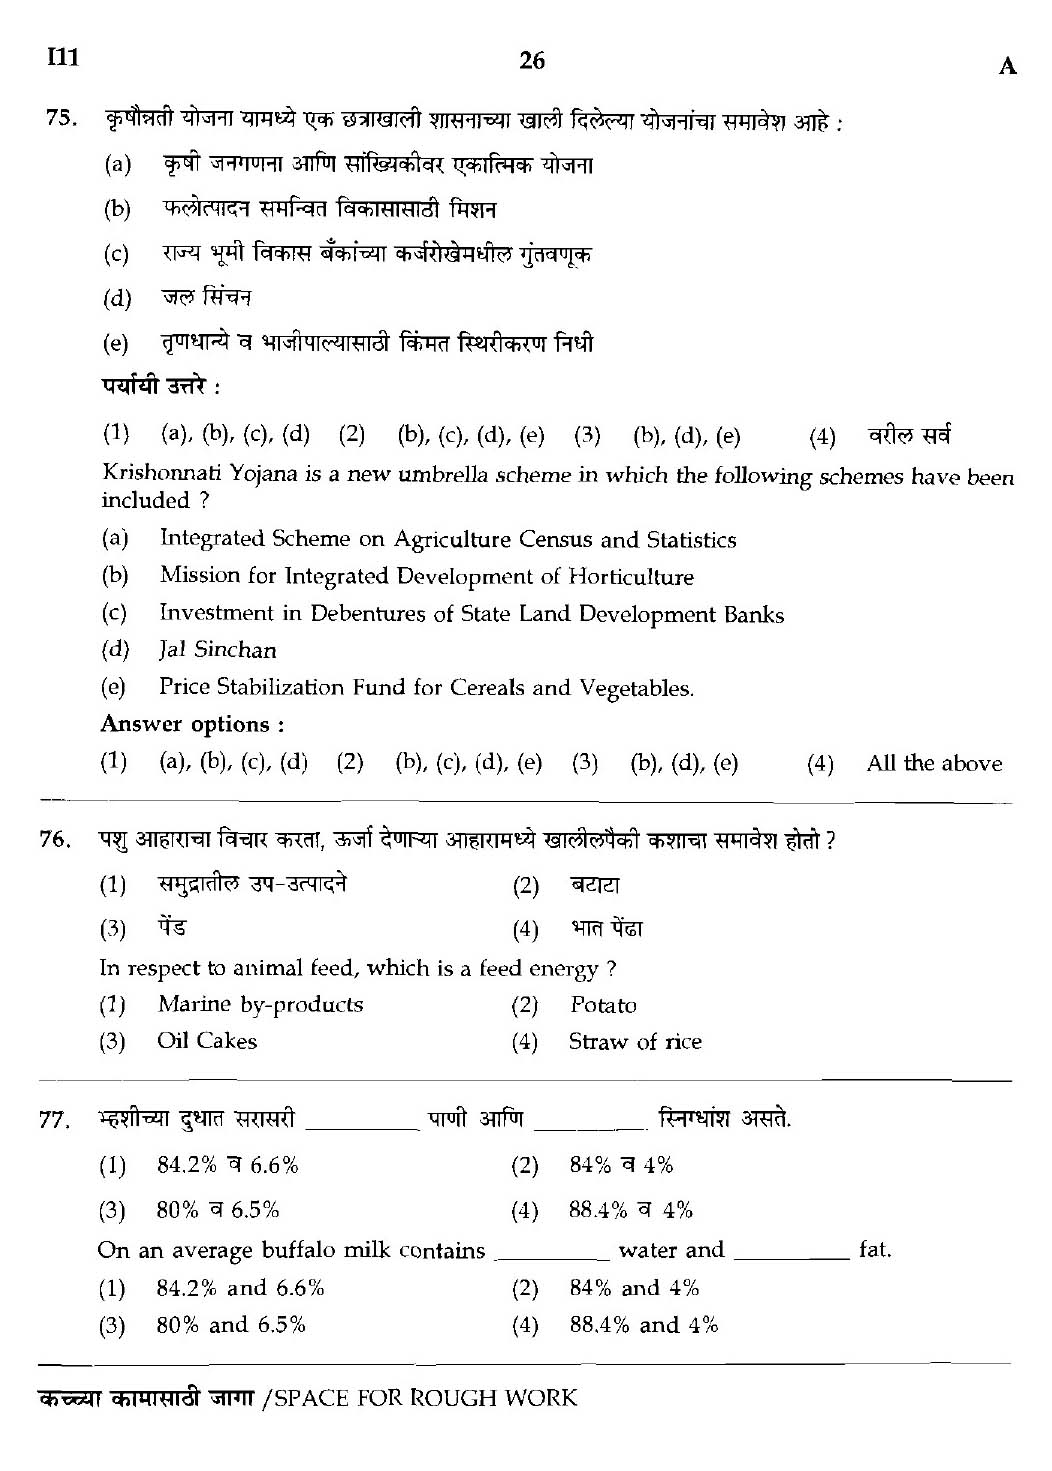 MPSC Agricultural Services Preliminary Exam 2018 Question Paper 25